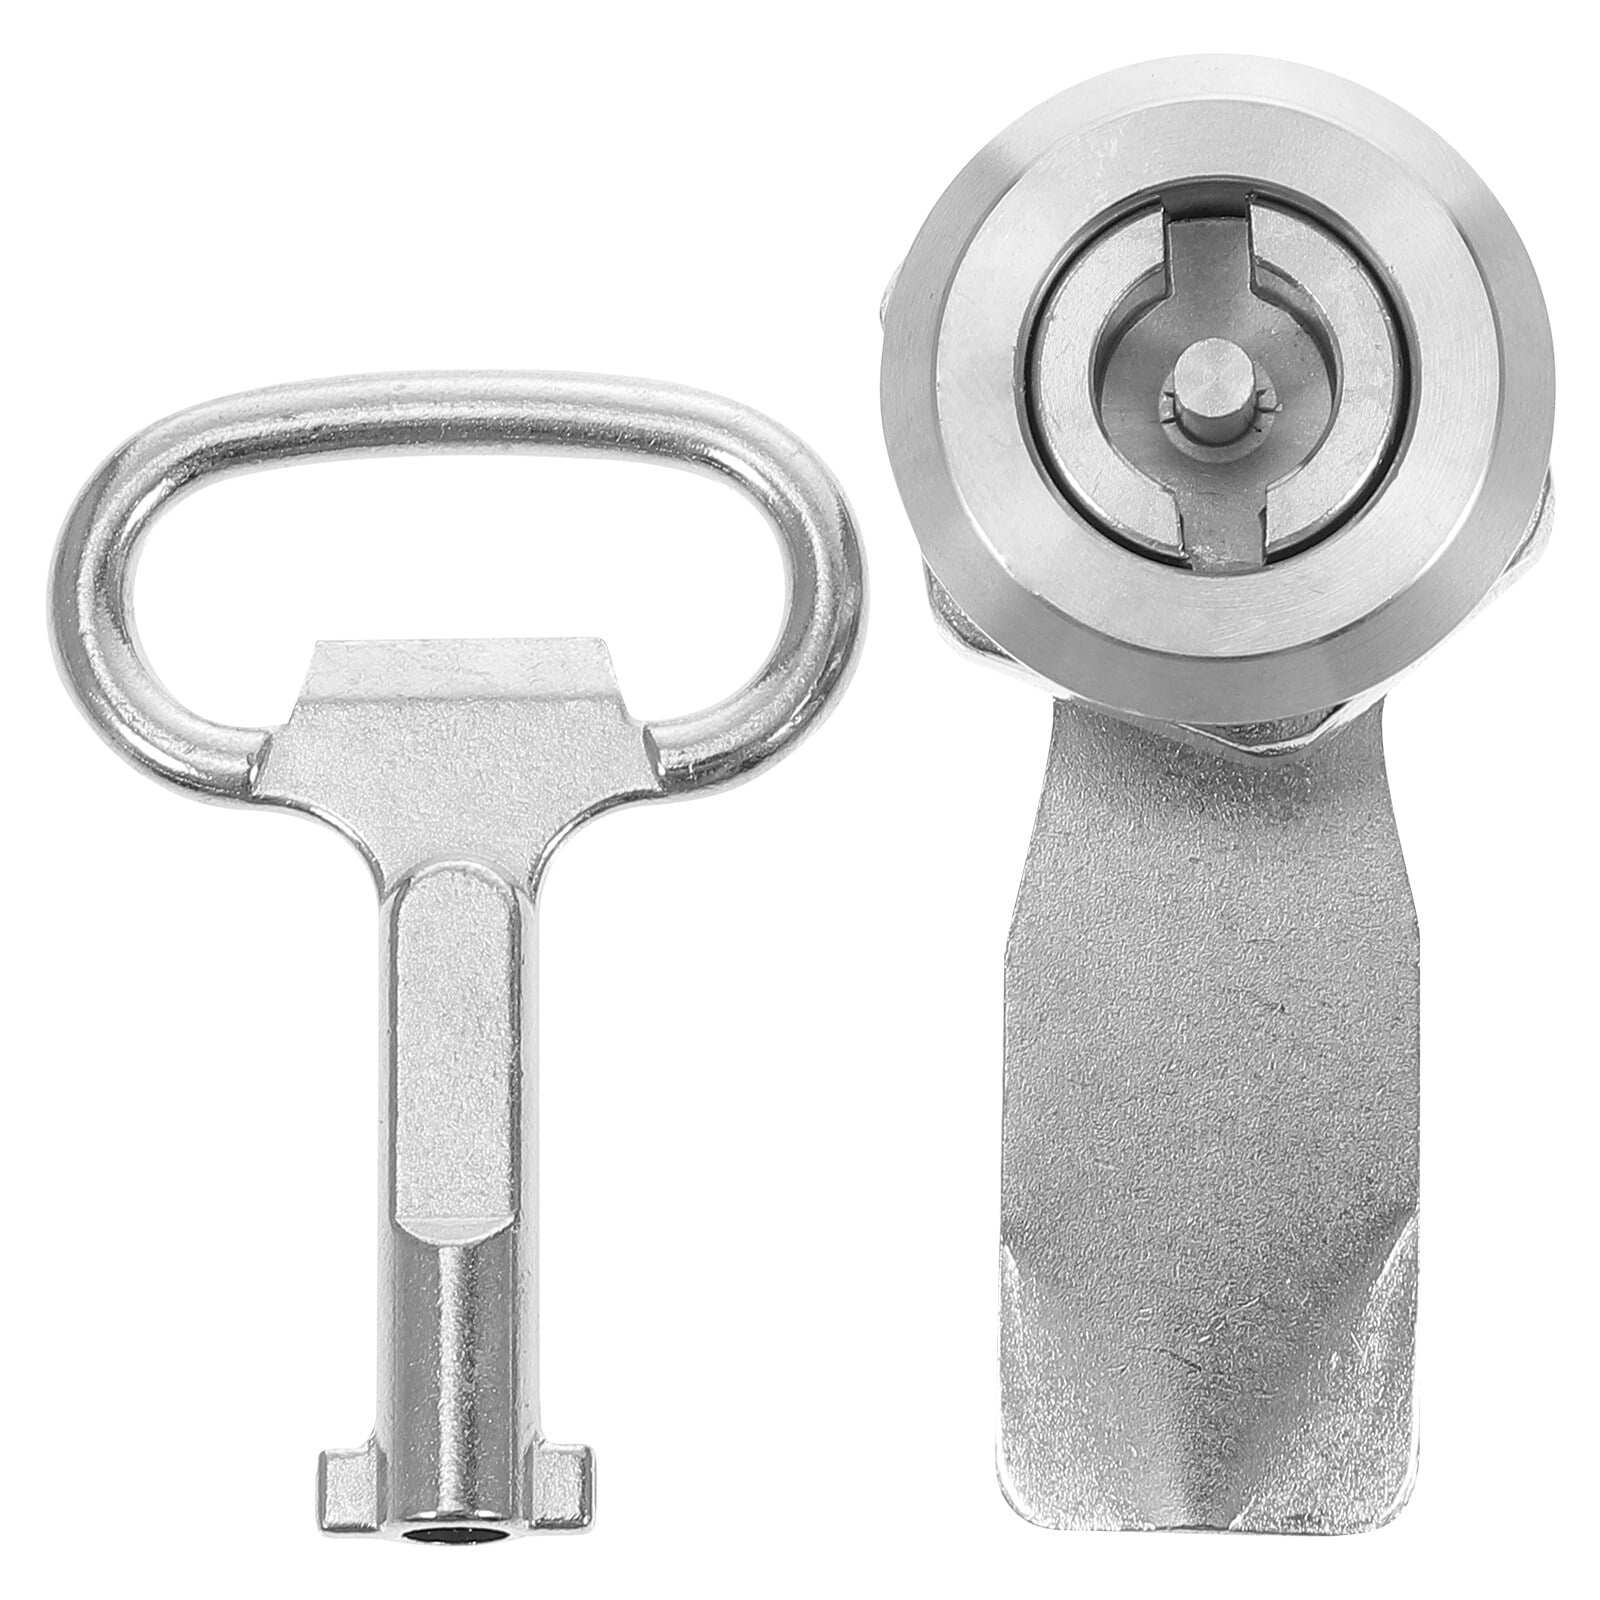 10-PACK 2 File Cabinet Lock: Keyed Alike—BLOWOUT!—MADE FOR THE OEM